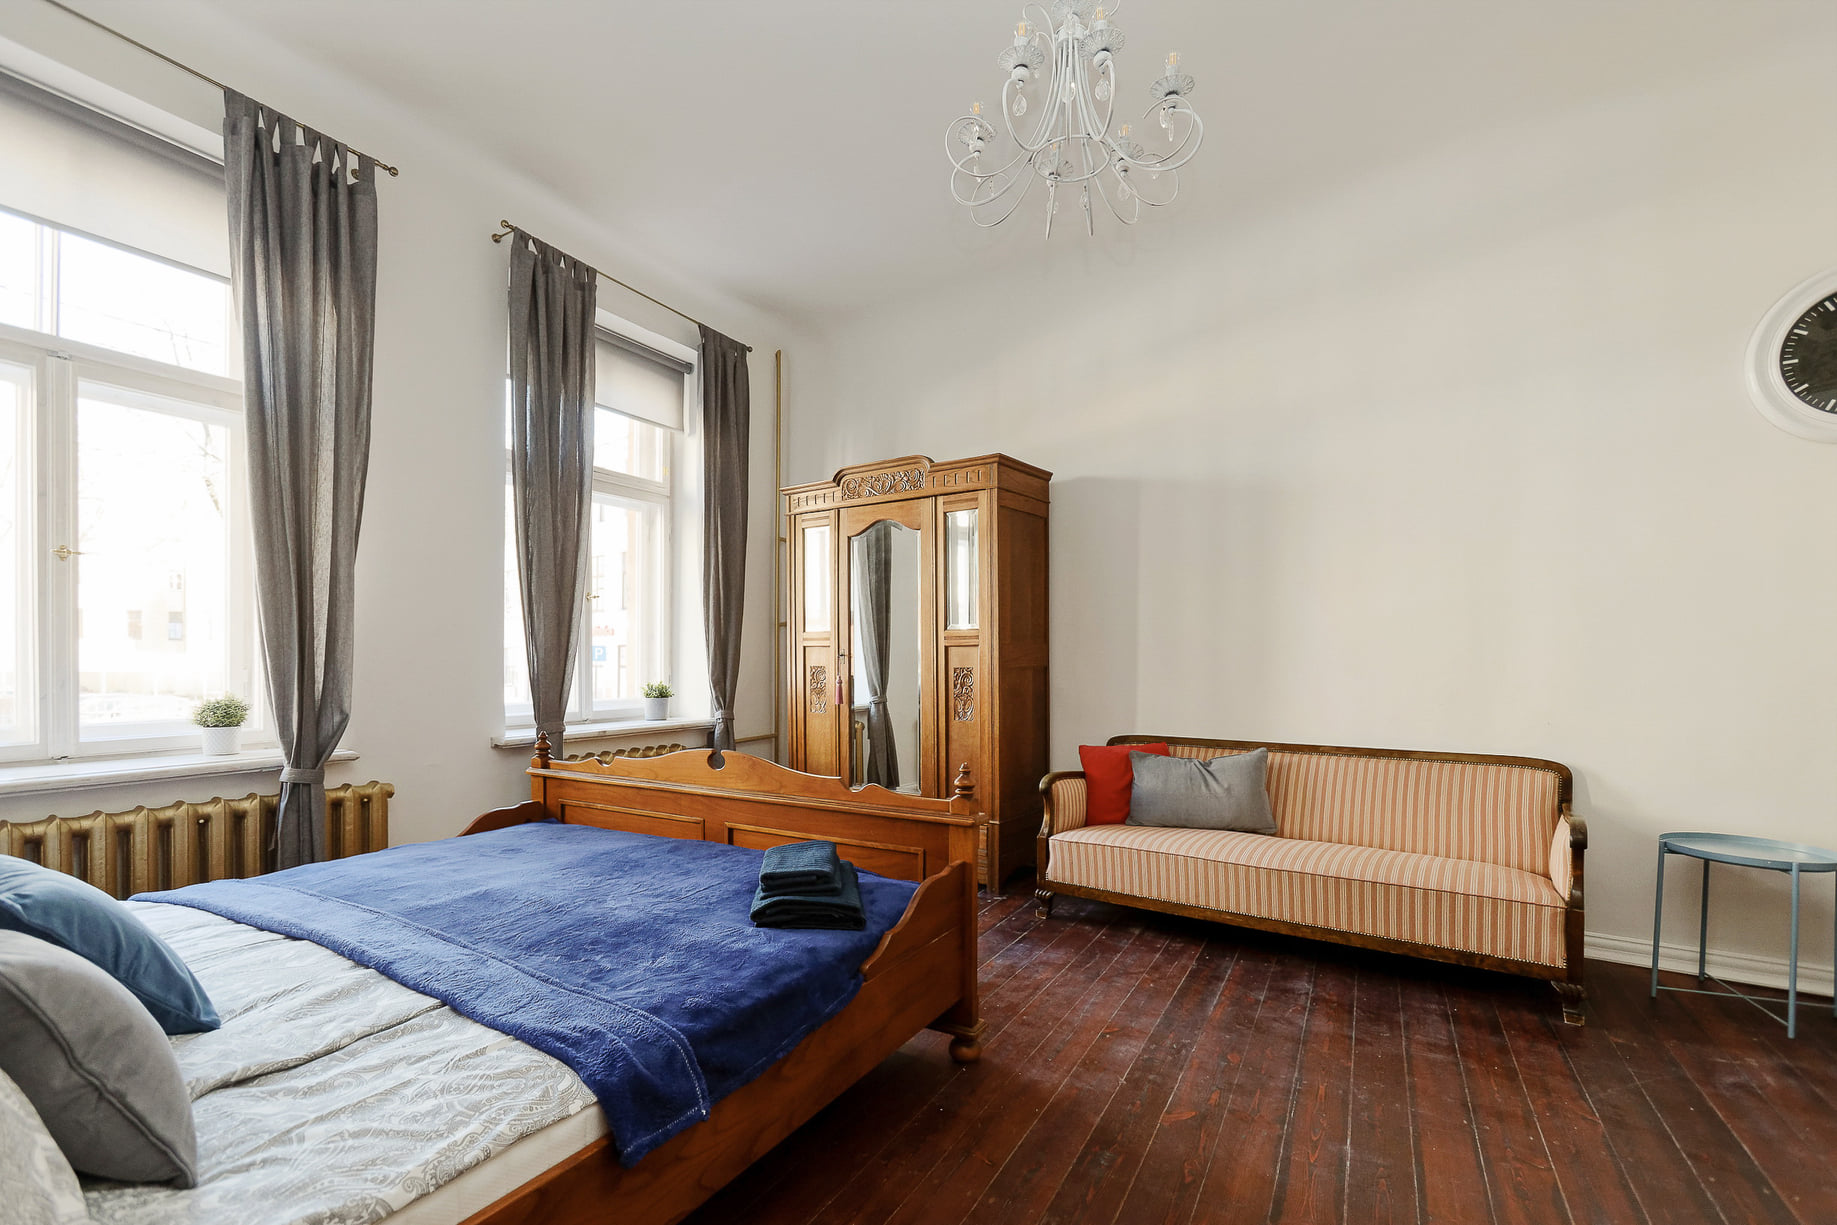 Apartment for rent, Ģertrūdes street 14 - Image 1